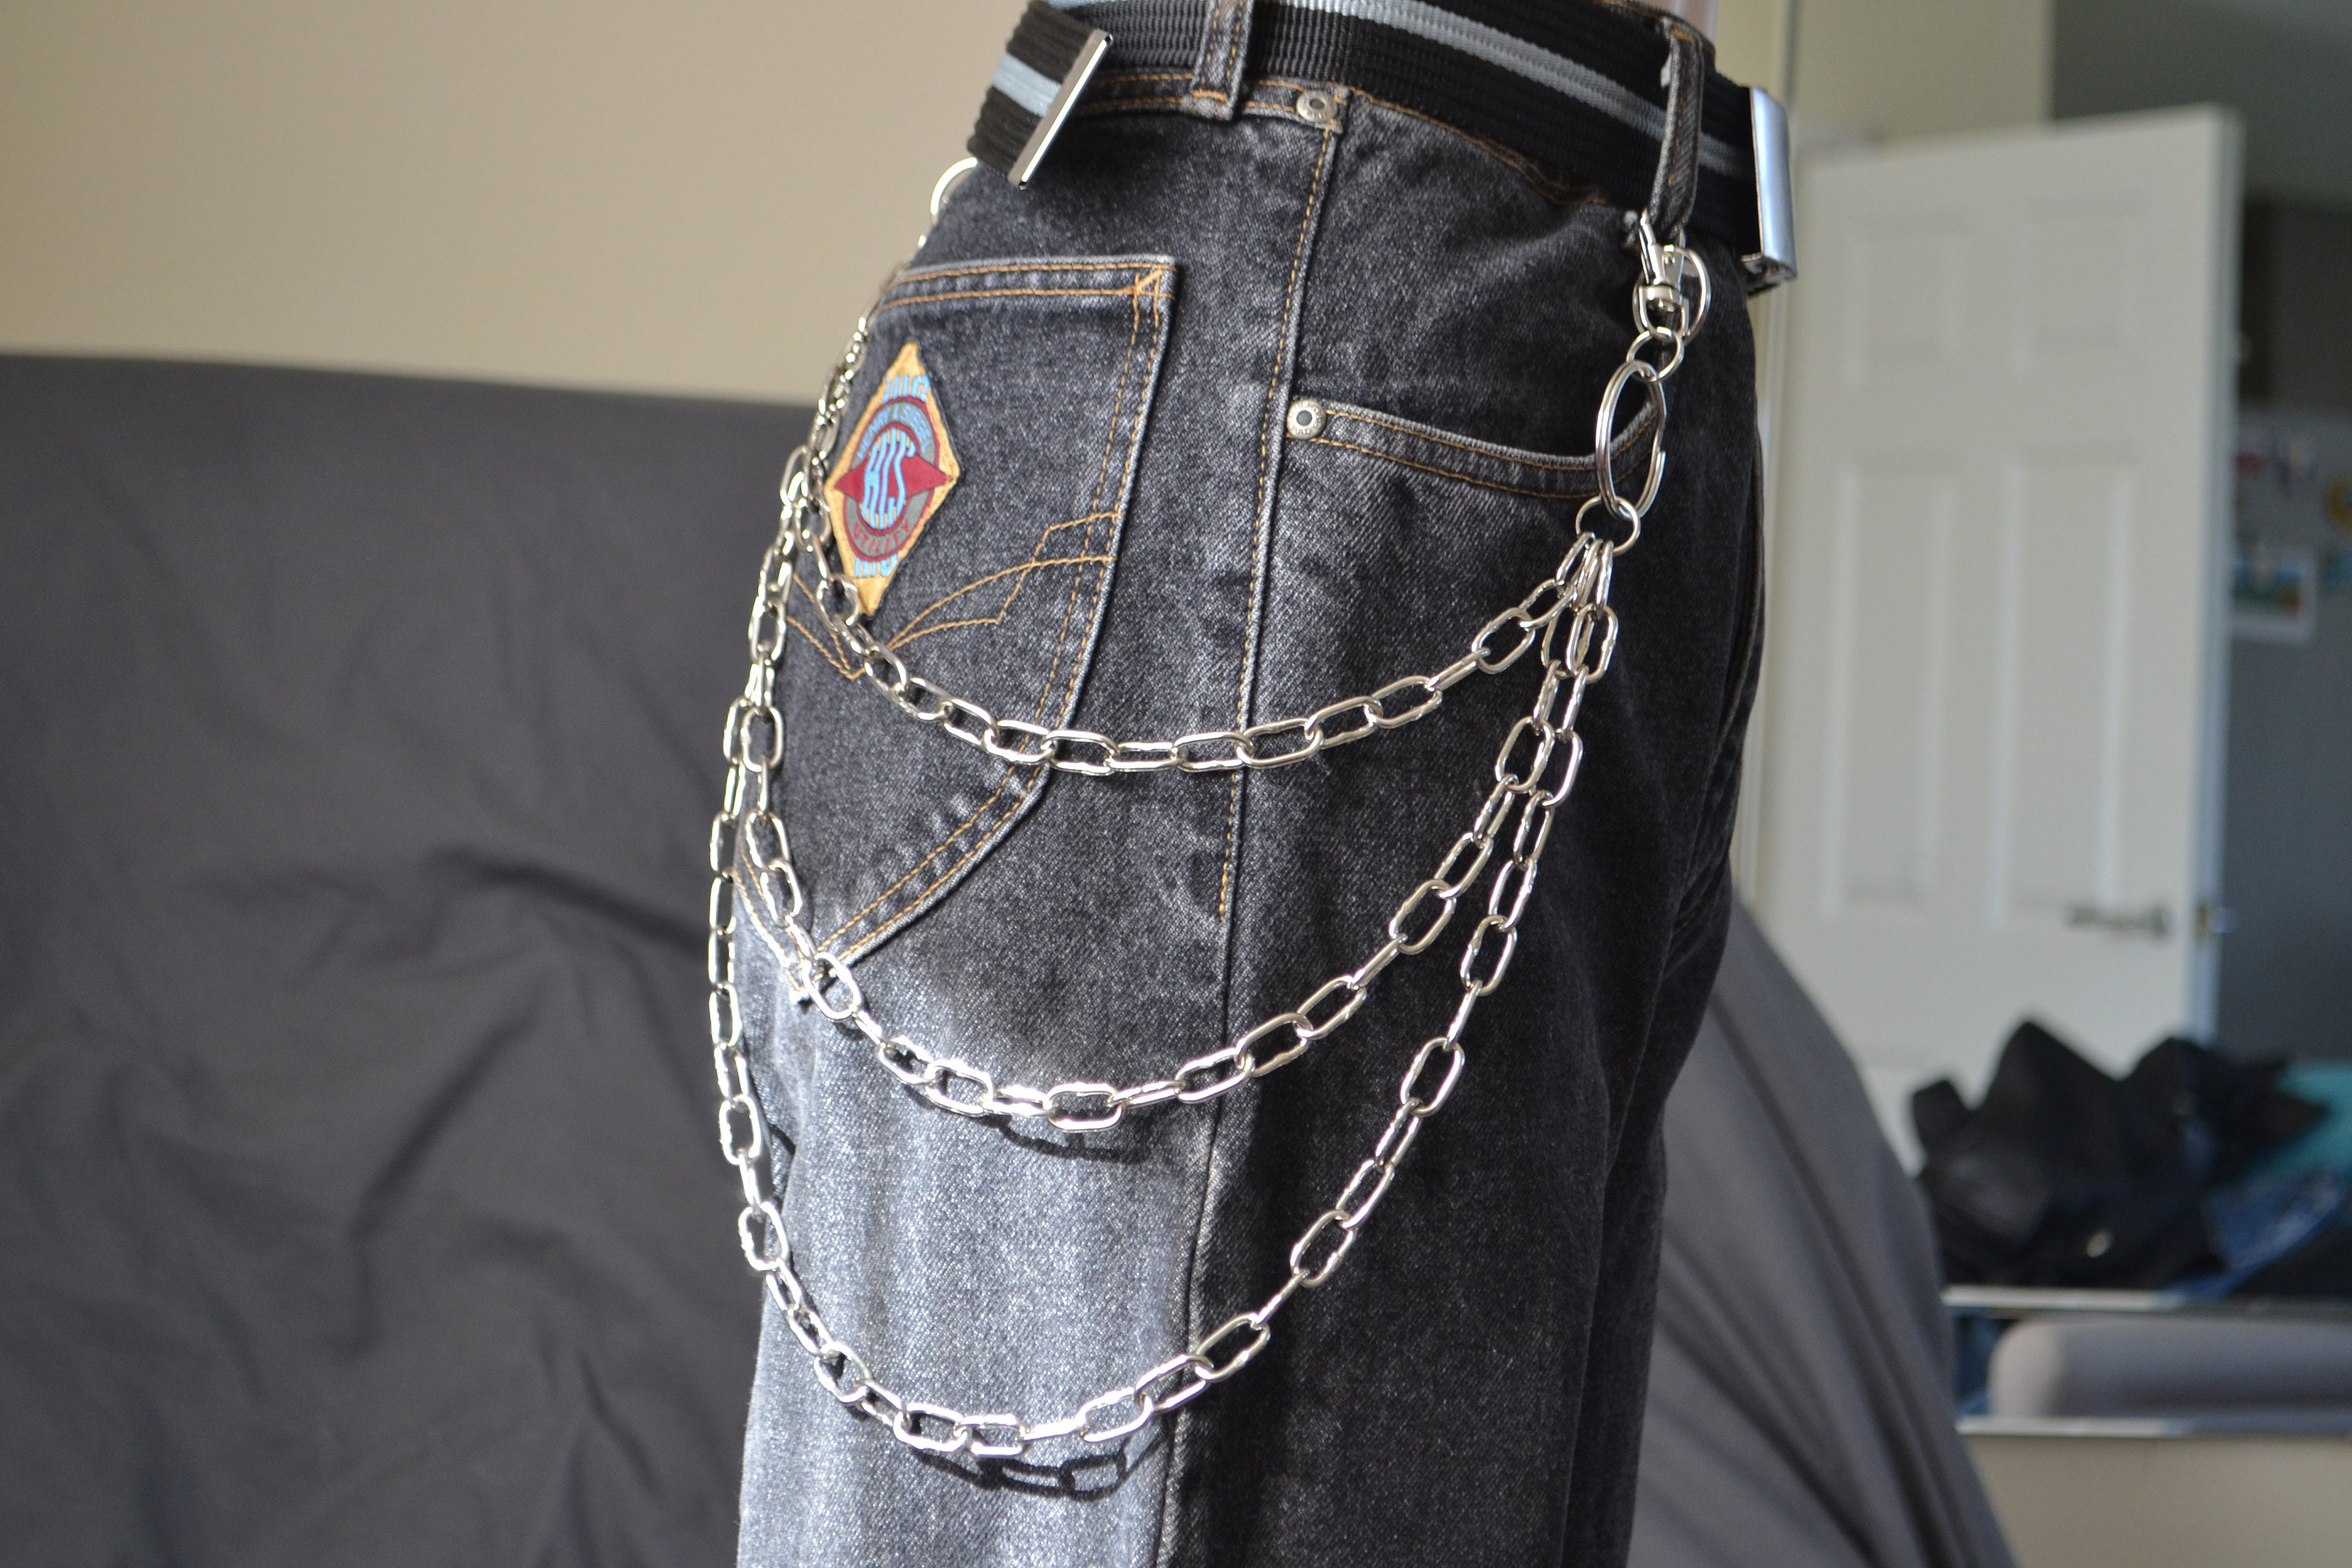 HIGHGODDESSUK Wallet Chain with Leather Belt Loop and Dog Clip, Belt Chain, 90's Trouser Chain, Industrial, Alternative, Grunge, Goth, Punk, Rock, Grungy